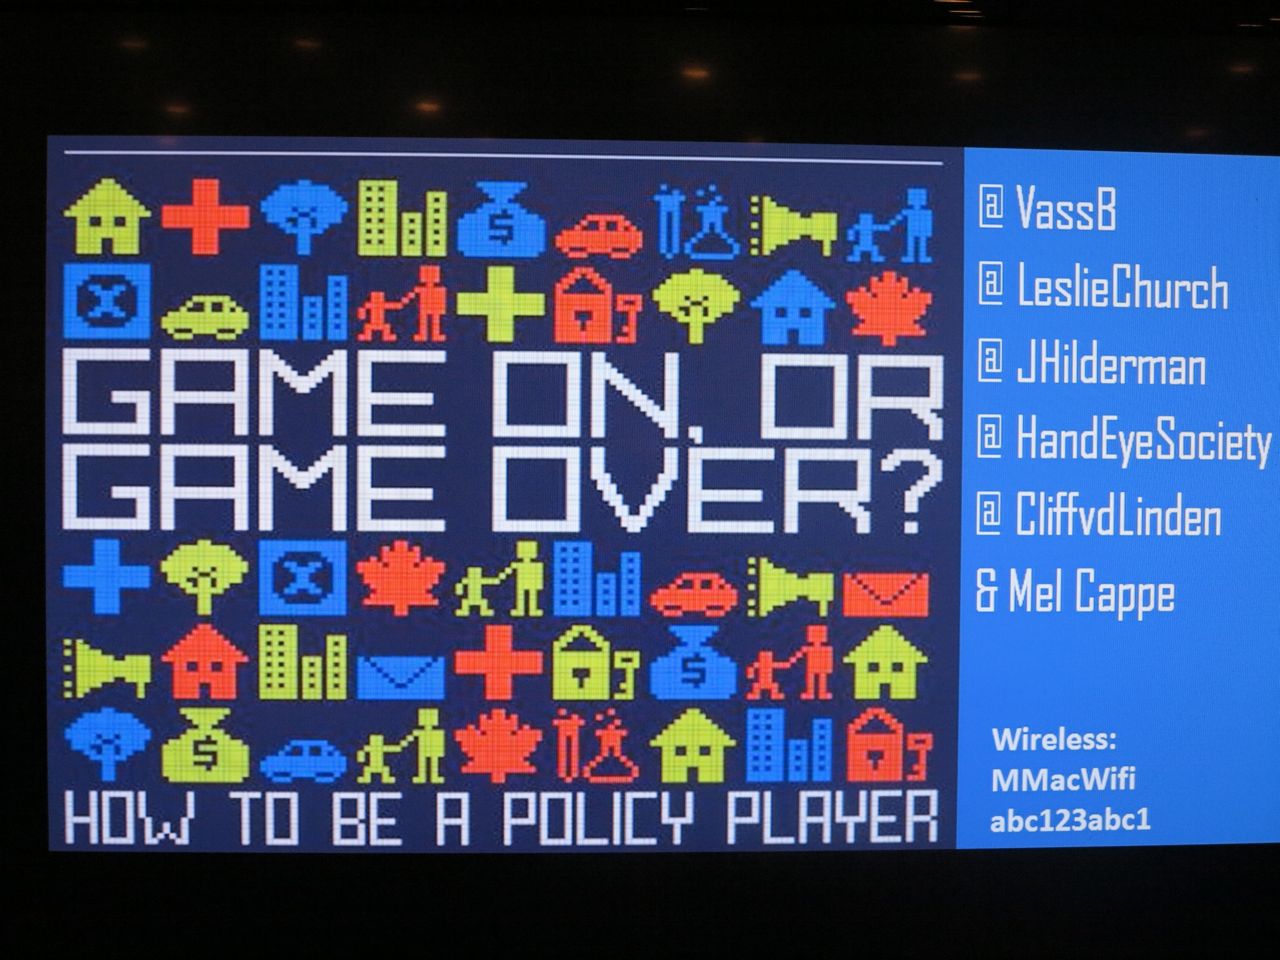 “Game On, Or Game Over? How to be a Policy Player”